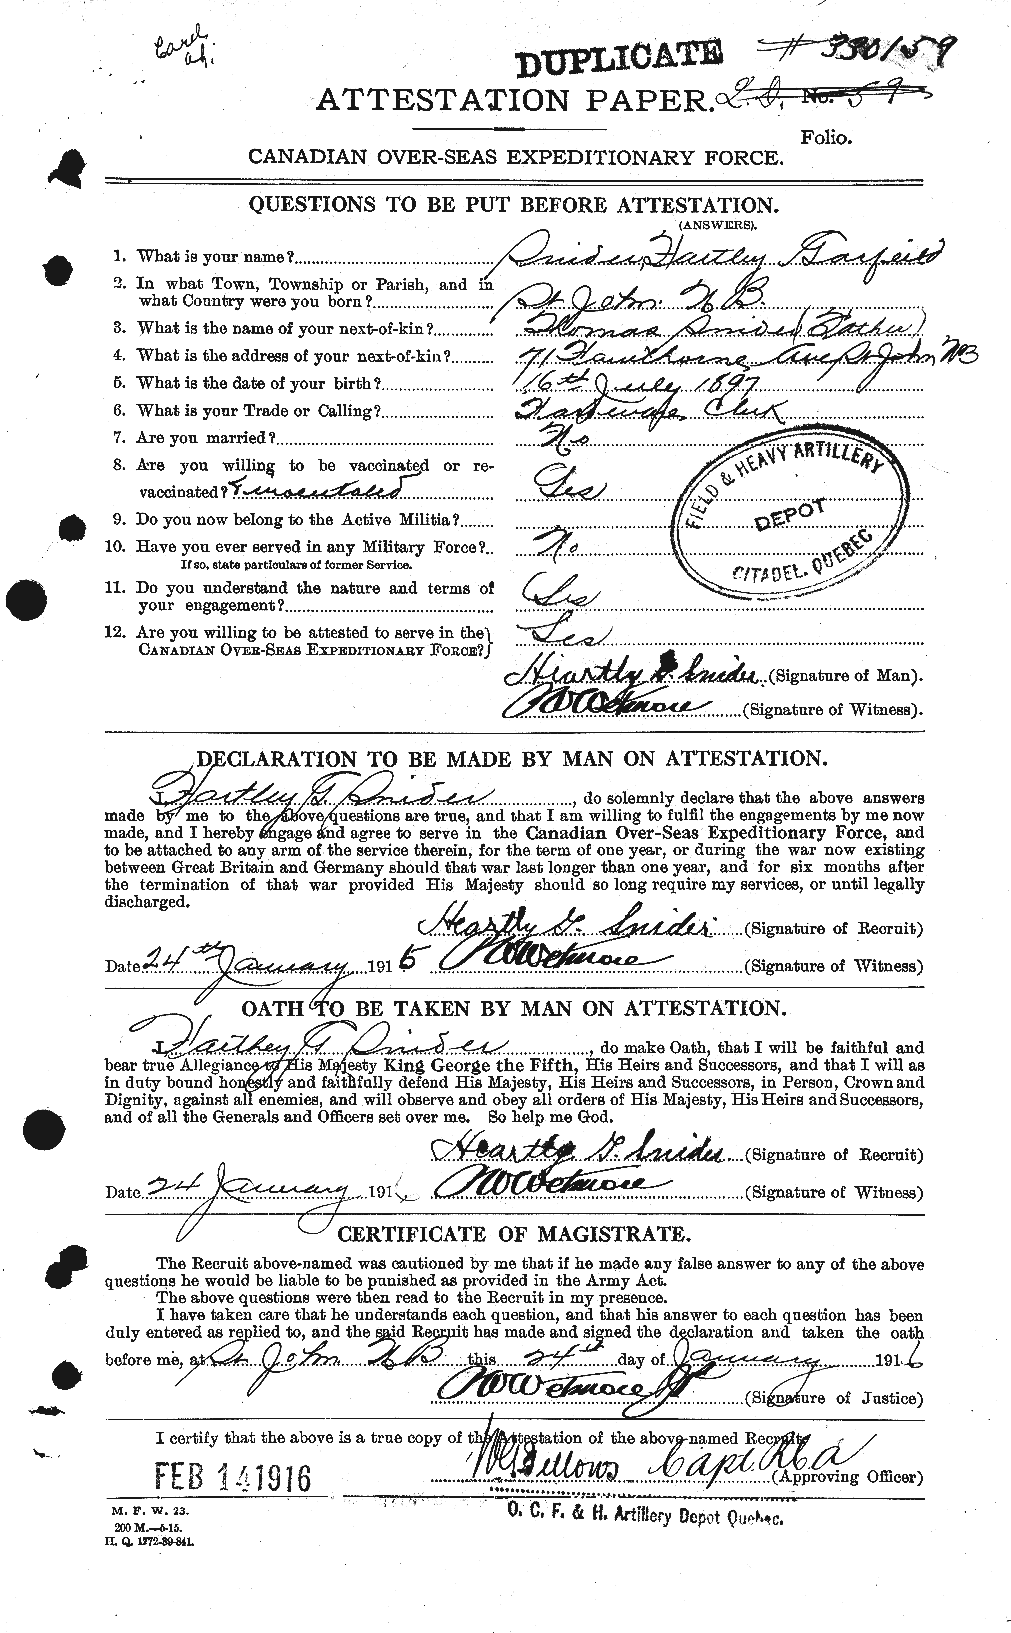 Personnel Records of the First World War - CEF 110027a